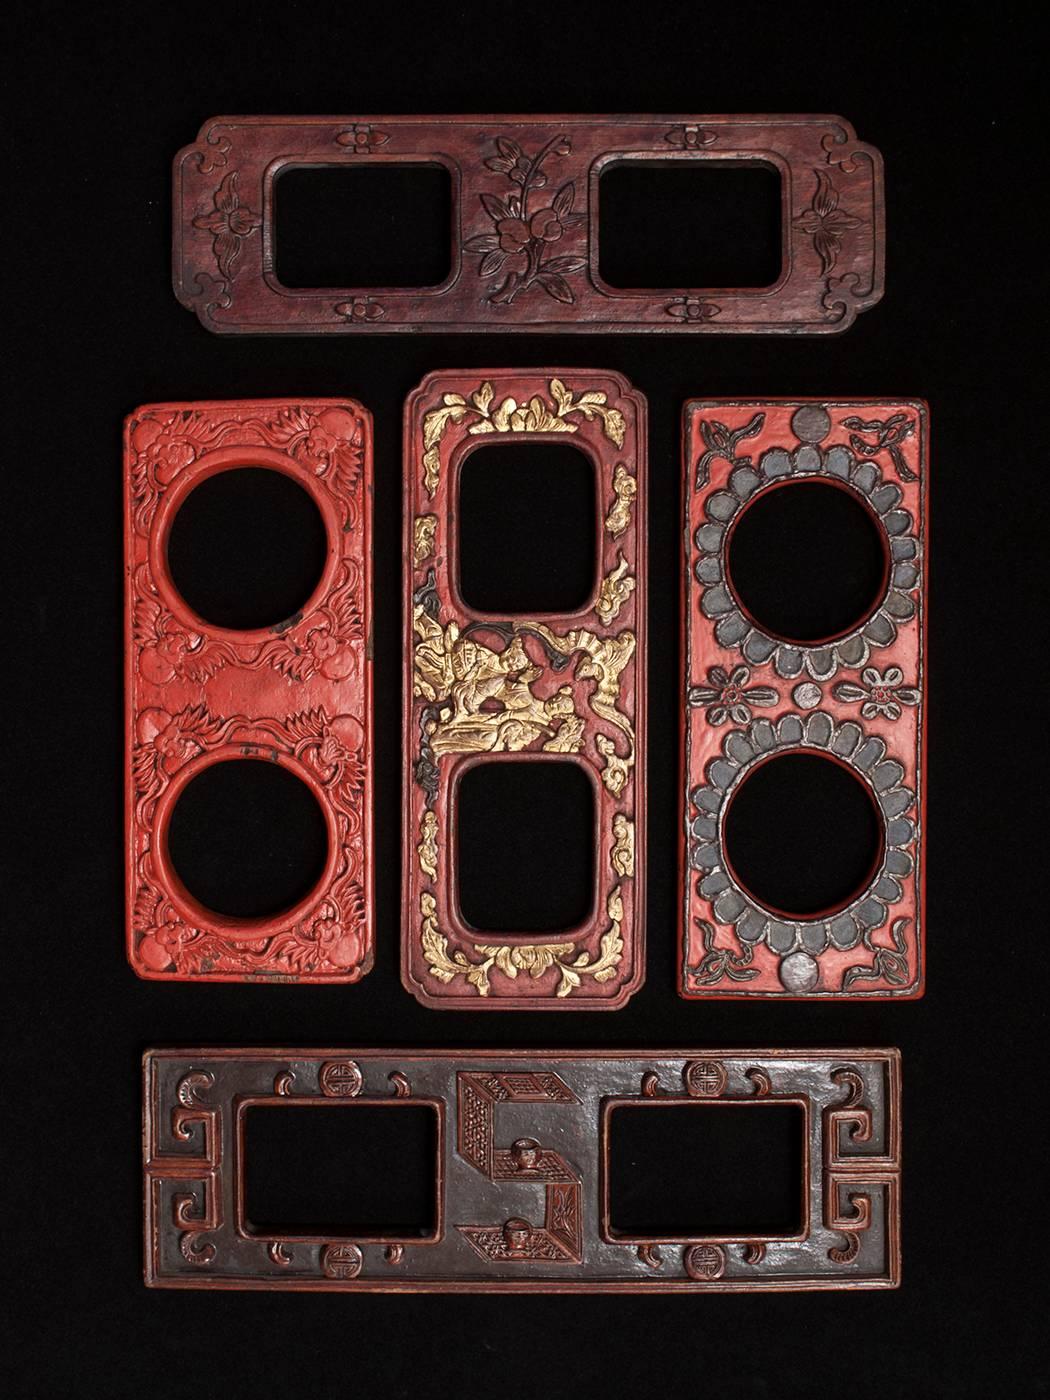 Offered by Zena Kruzick
Early 20th century opera handcuffs, China

These curious objects were used in Chinese operas as stage handcuffs, presumably during a scene where someone is arrested for a crime. From correspondence with Tess Johnston: